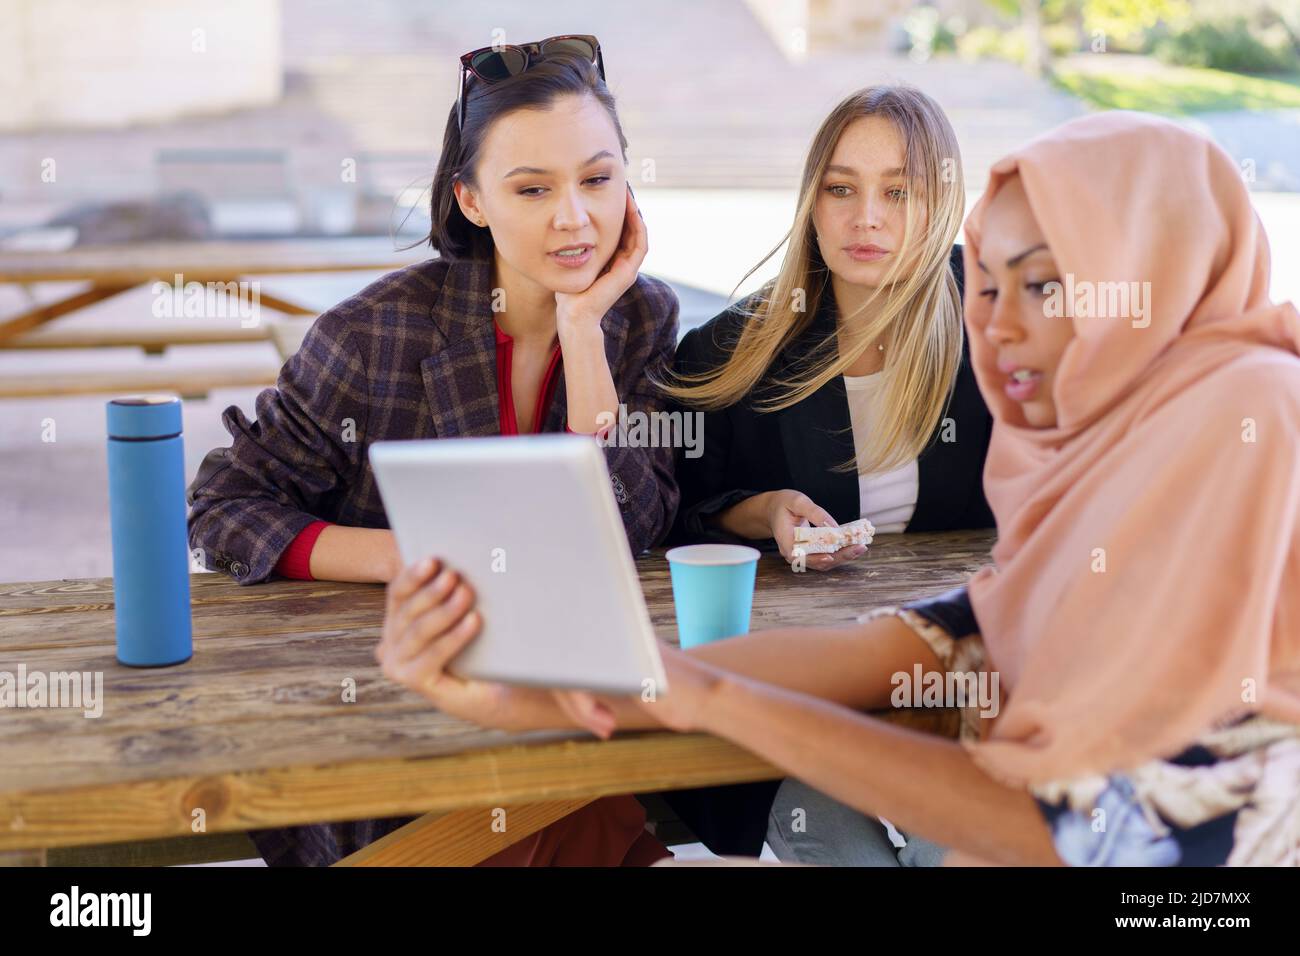 Cheerful diverse women sharing tablet during coffee break in cafe Stock Photo